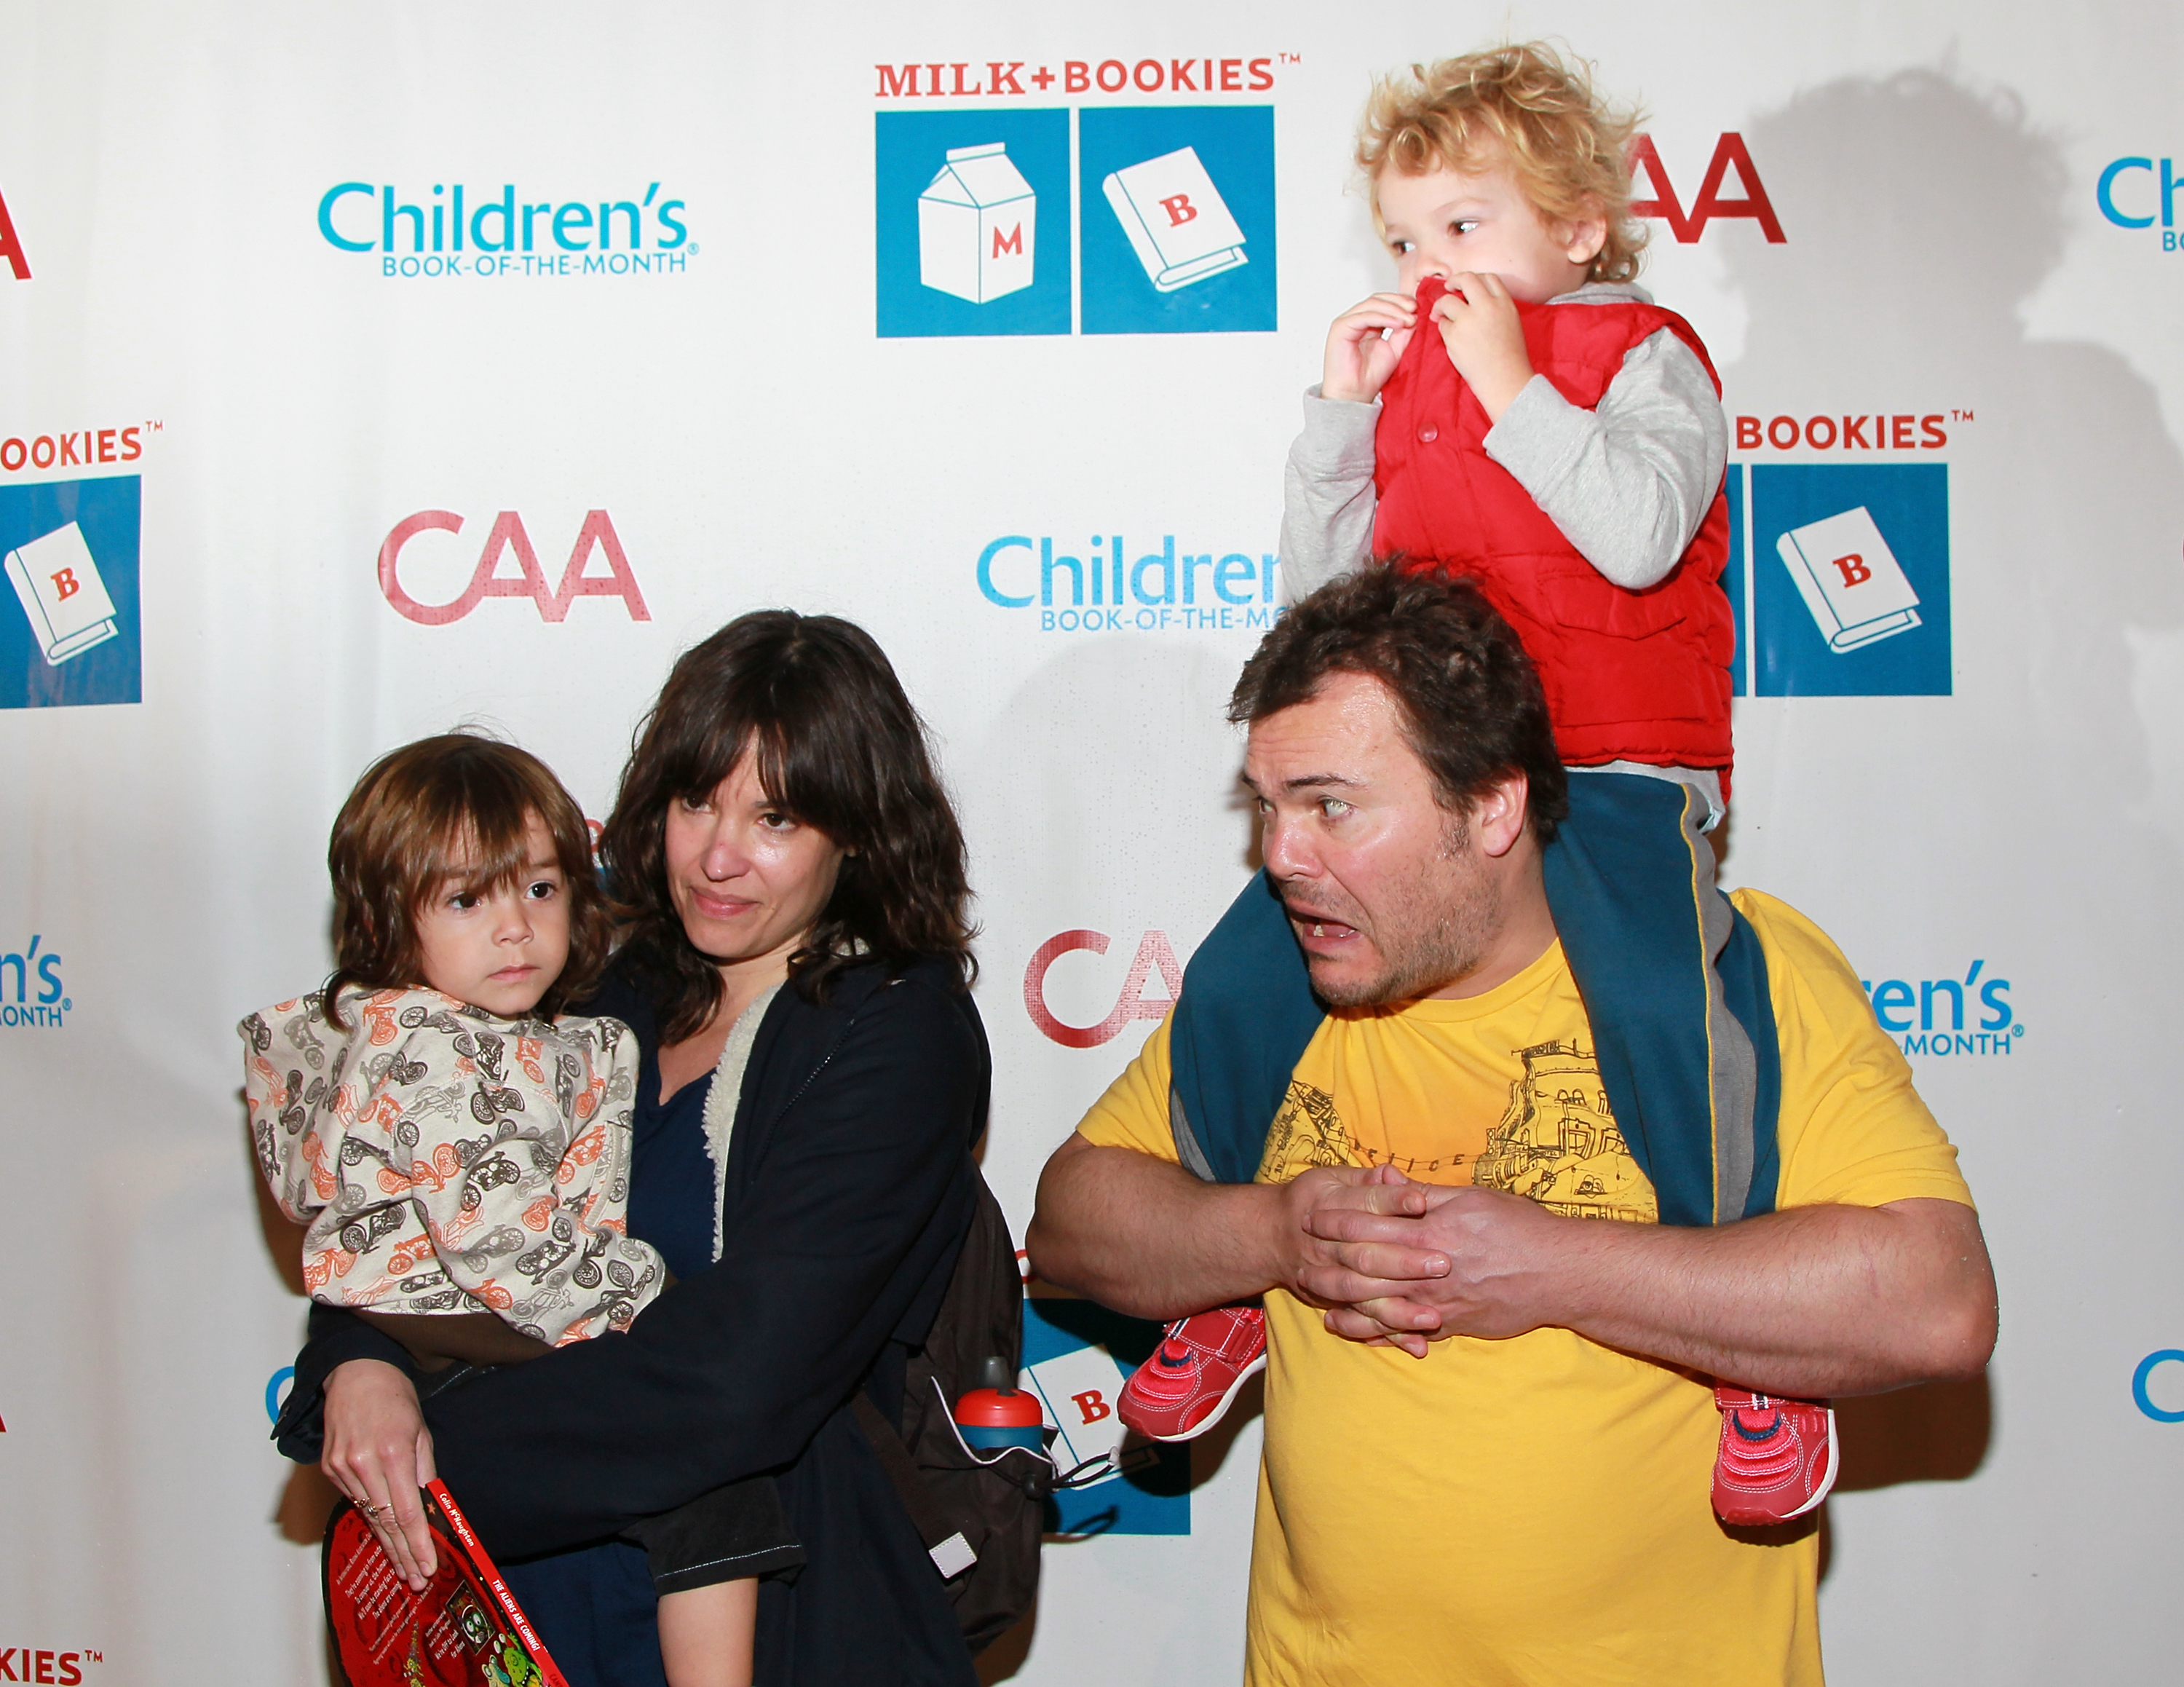 Actor Jack Black (R), son Samuel Black (on his shoulders) and wife Tanya Haden holding son Thomas Black at the 2nd Annual Milk + Bookies Story Time Celebration at the Skirball Cultural Center in Los Angeles, California on March 20, 2011 | Source: Getty Images